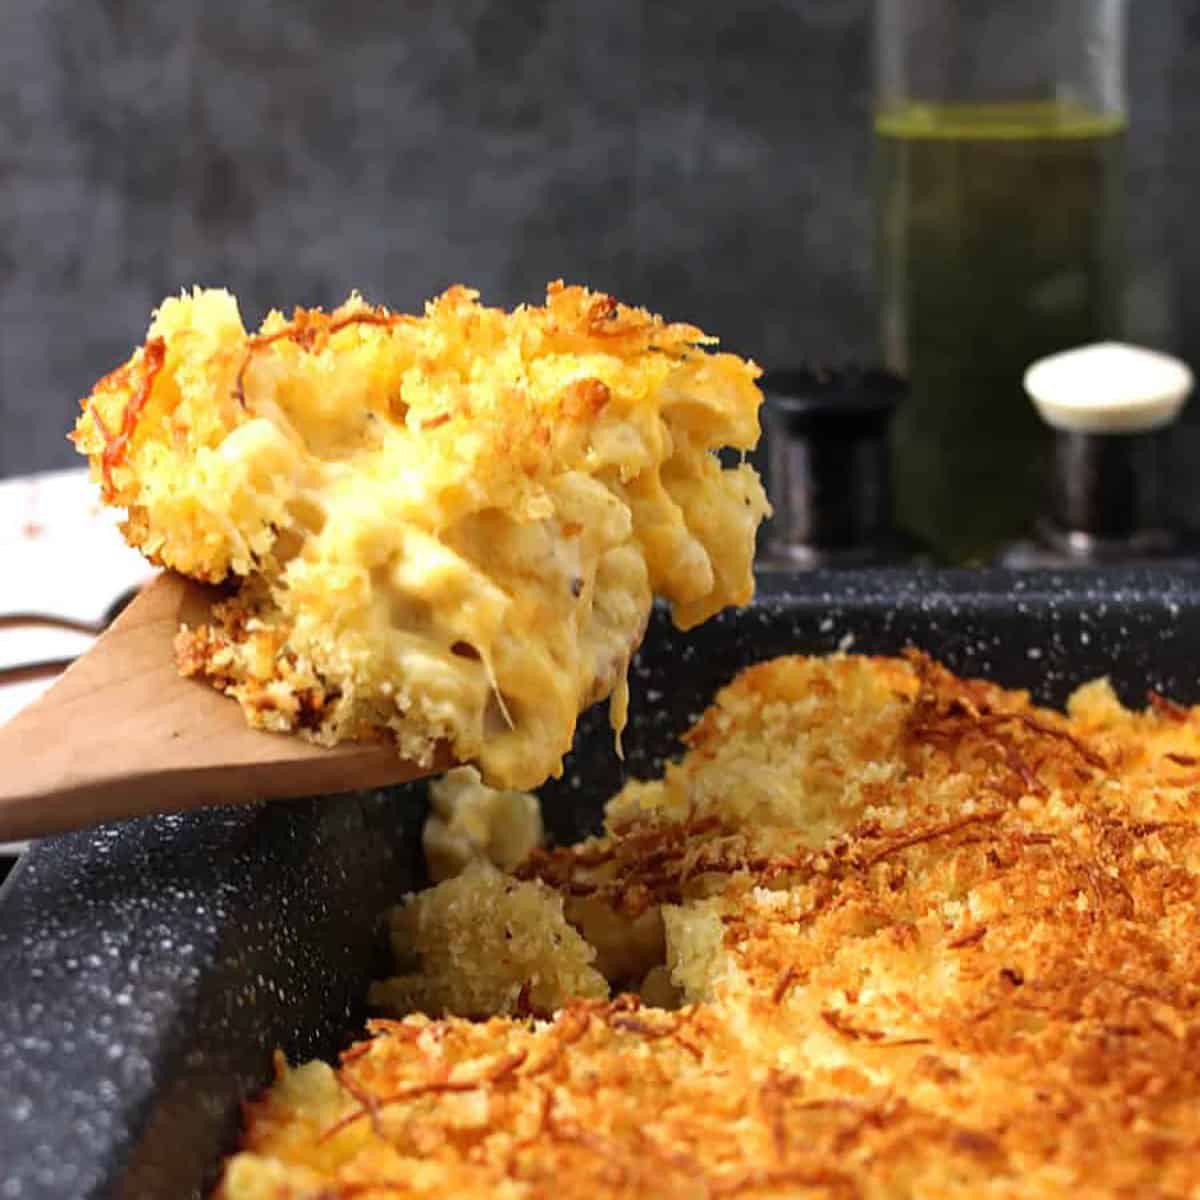 Best Mac and Cheese Recipe | Easy Creamy Homemade Baked Mac and Cheese.